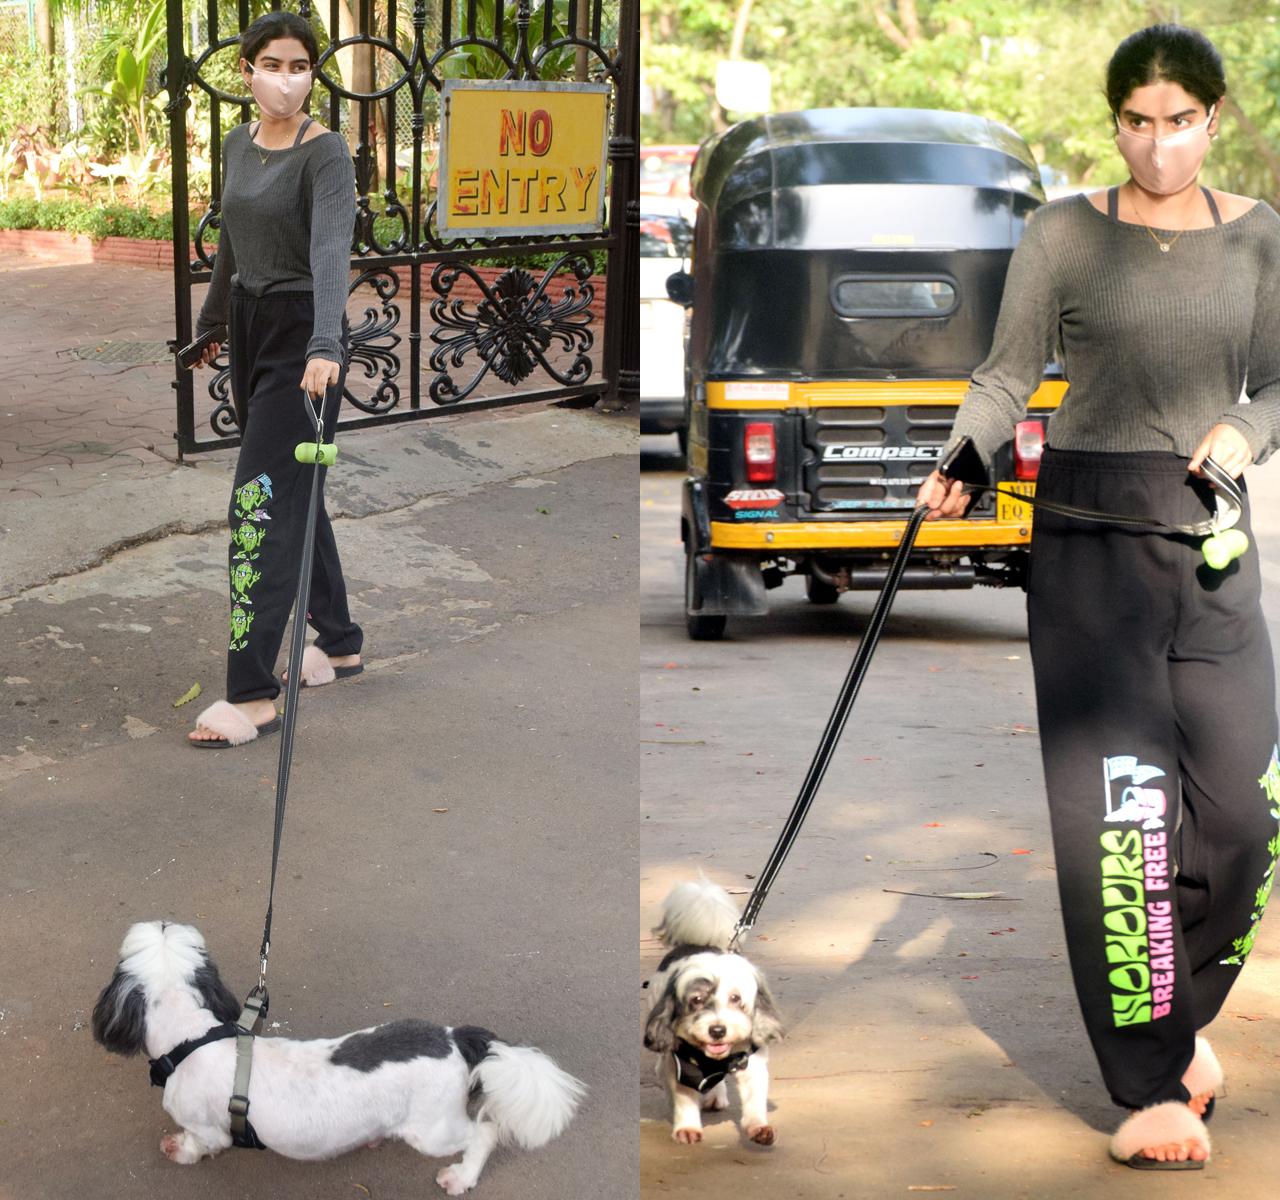 Khushi Kapoor was clicked with her cute pet dog, Panda. The star kid stepped out to take her pet on a walk, in and around the premises of her residence in Andheri Lokhandwala.